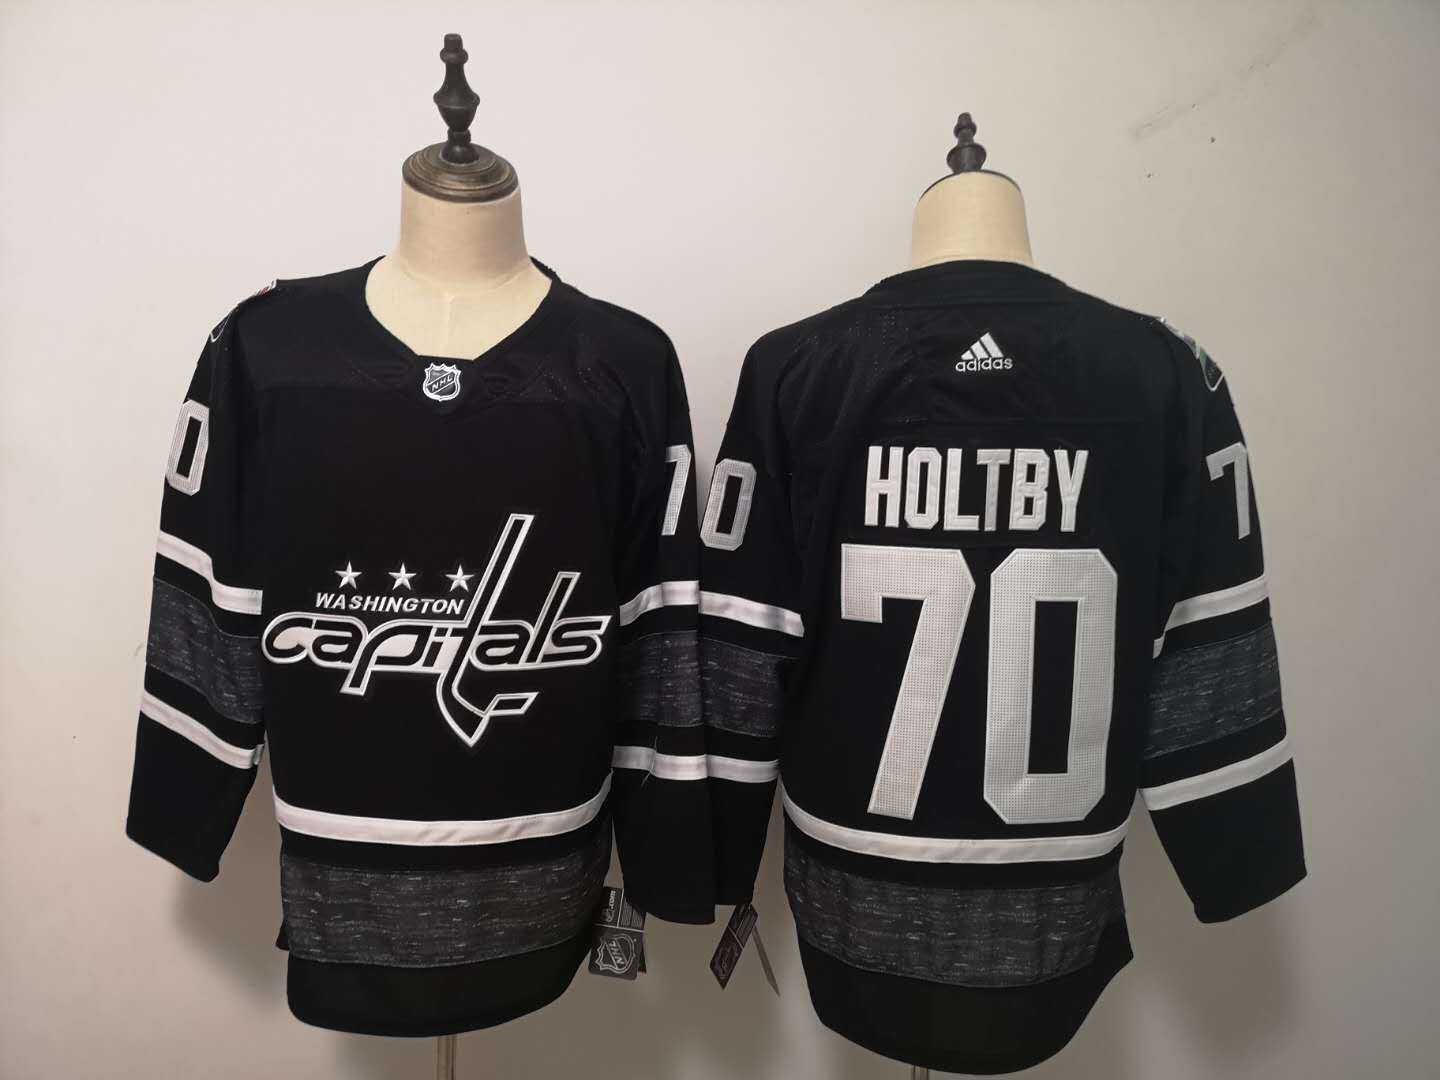 Capitals 70 Braden Holtby Black 2019 NHL All Star Game Adidas Jersey